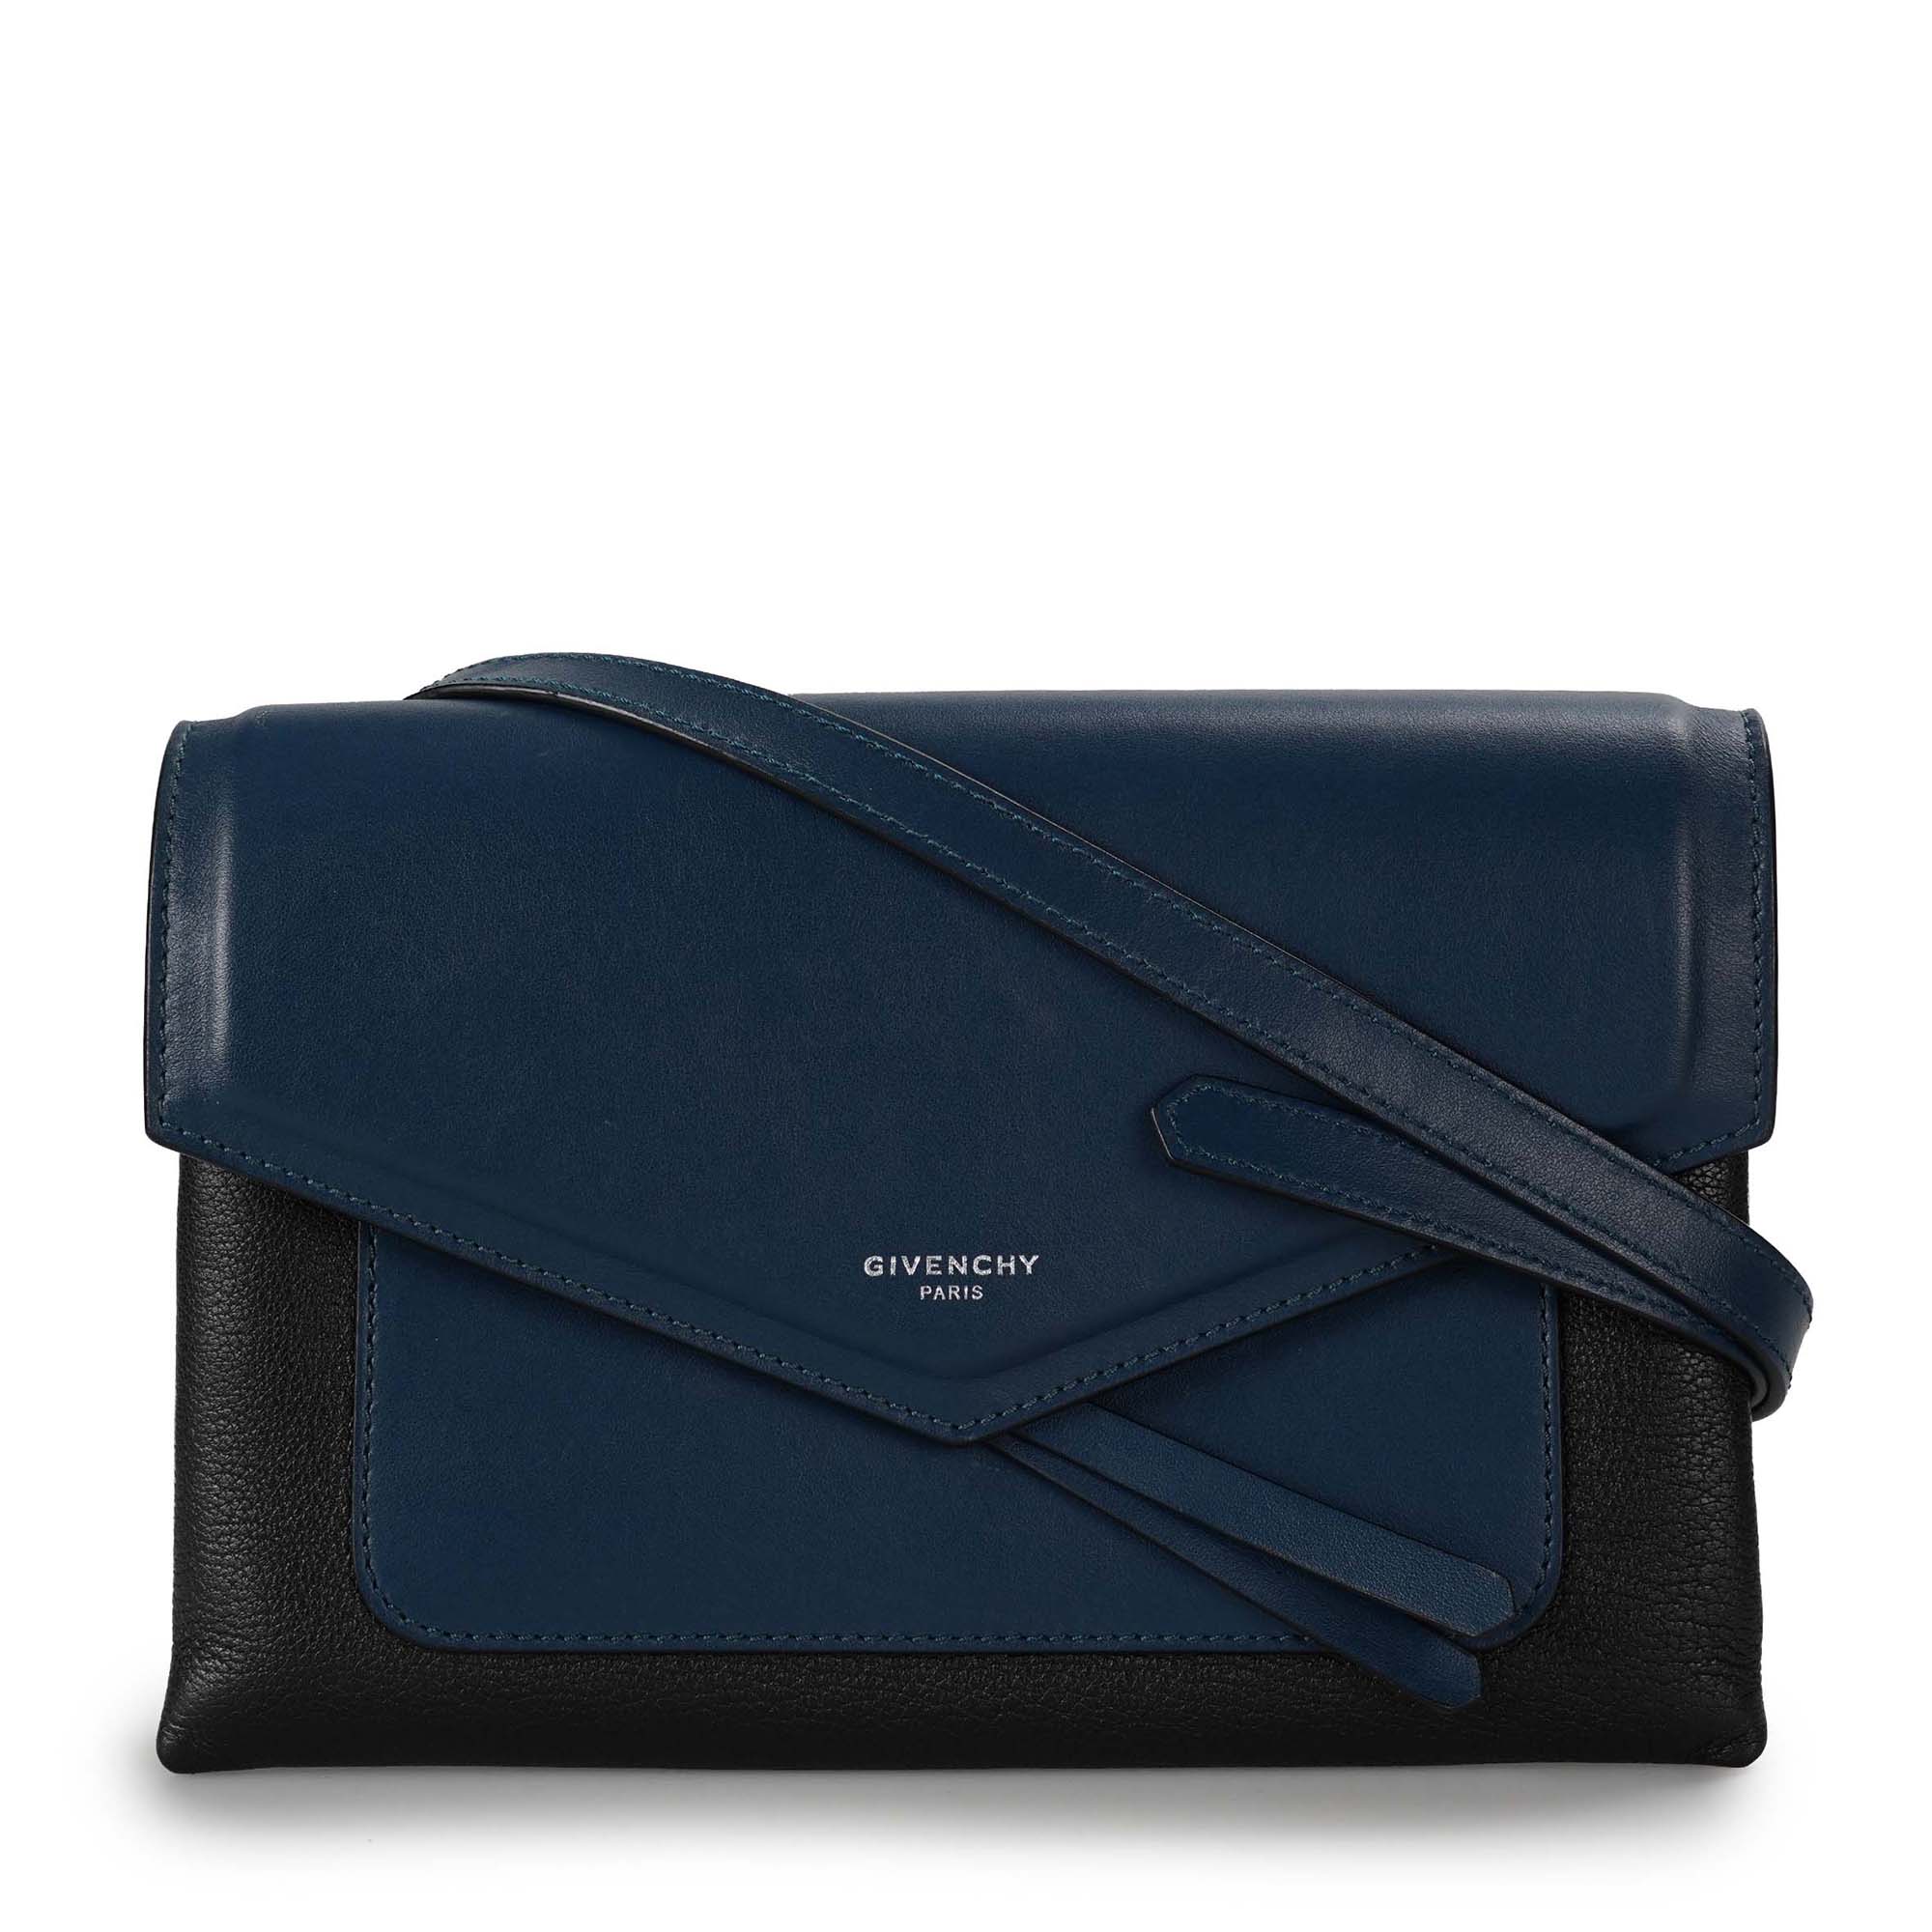 Givenchy - Navy Blue and Black Calfskin Leather Duetto Crossbody 